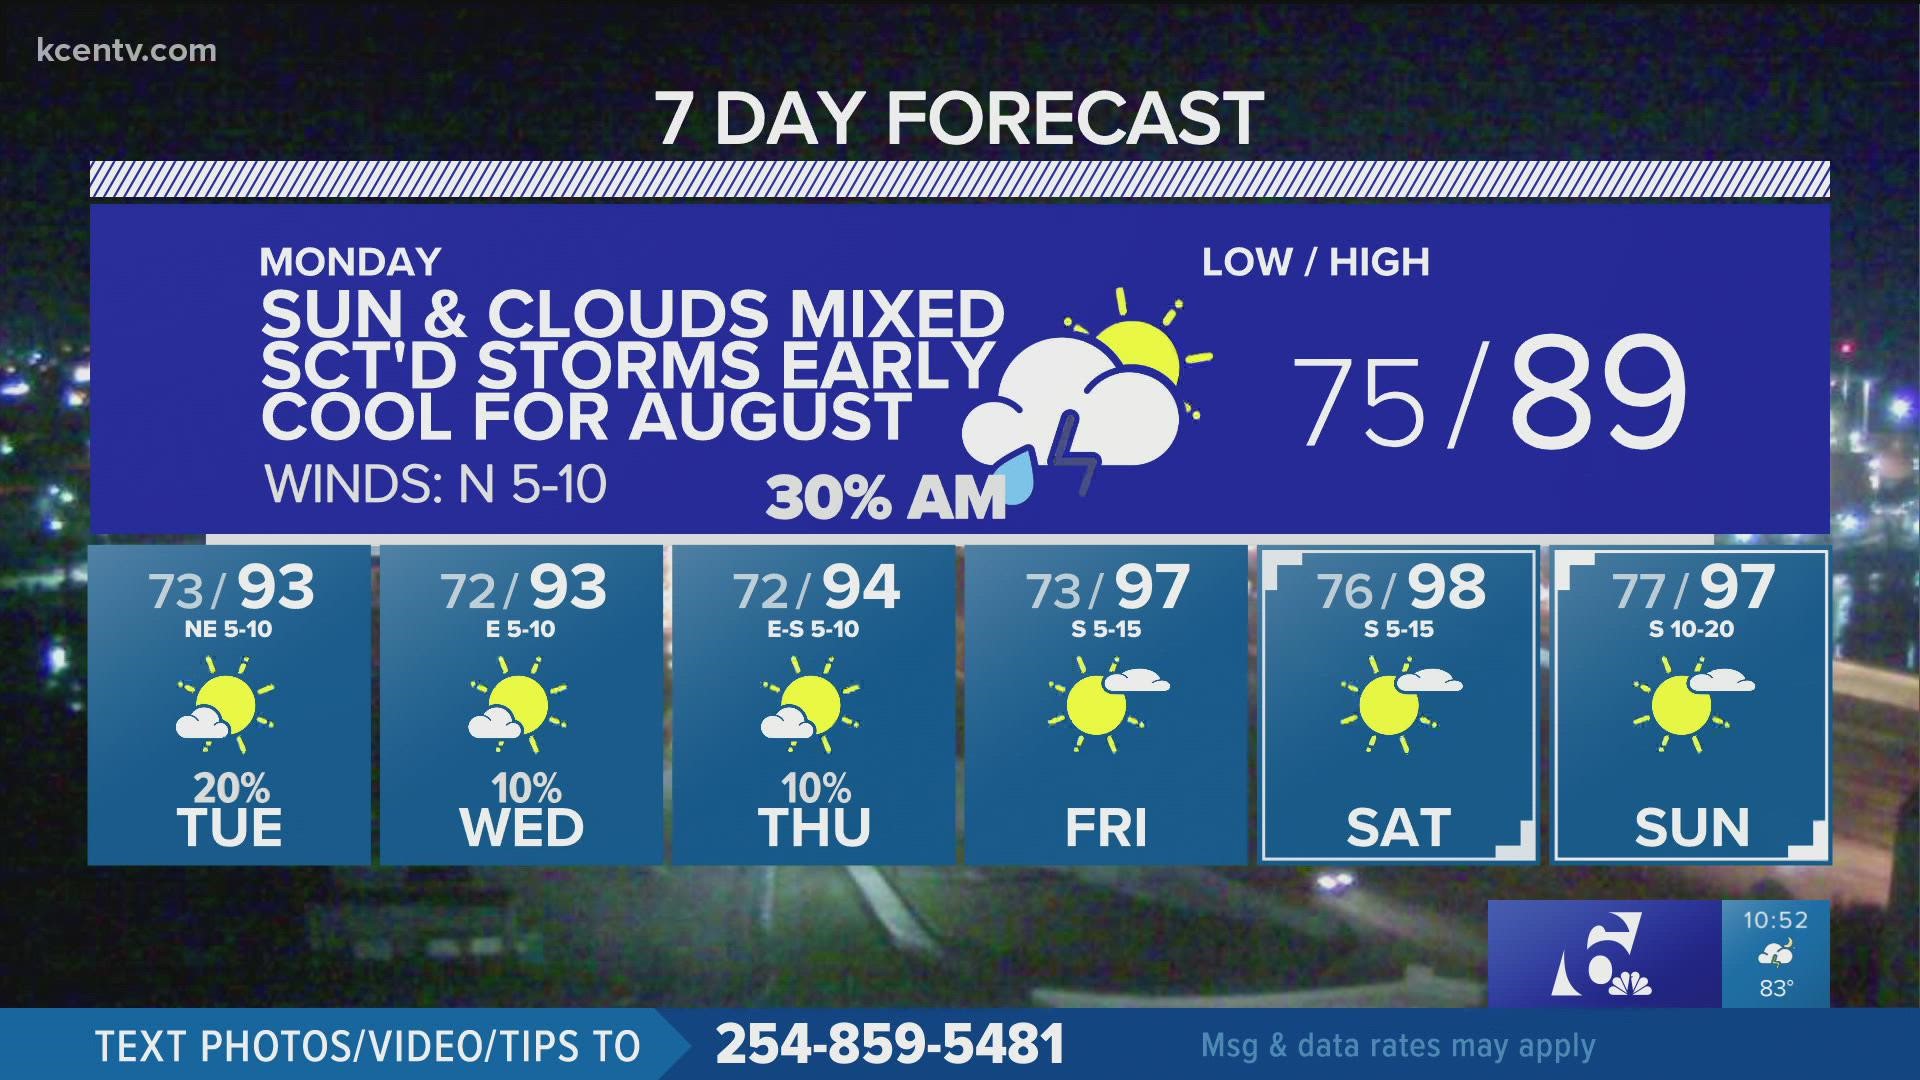 Expect some scattered showers to start your week.